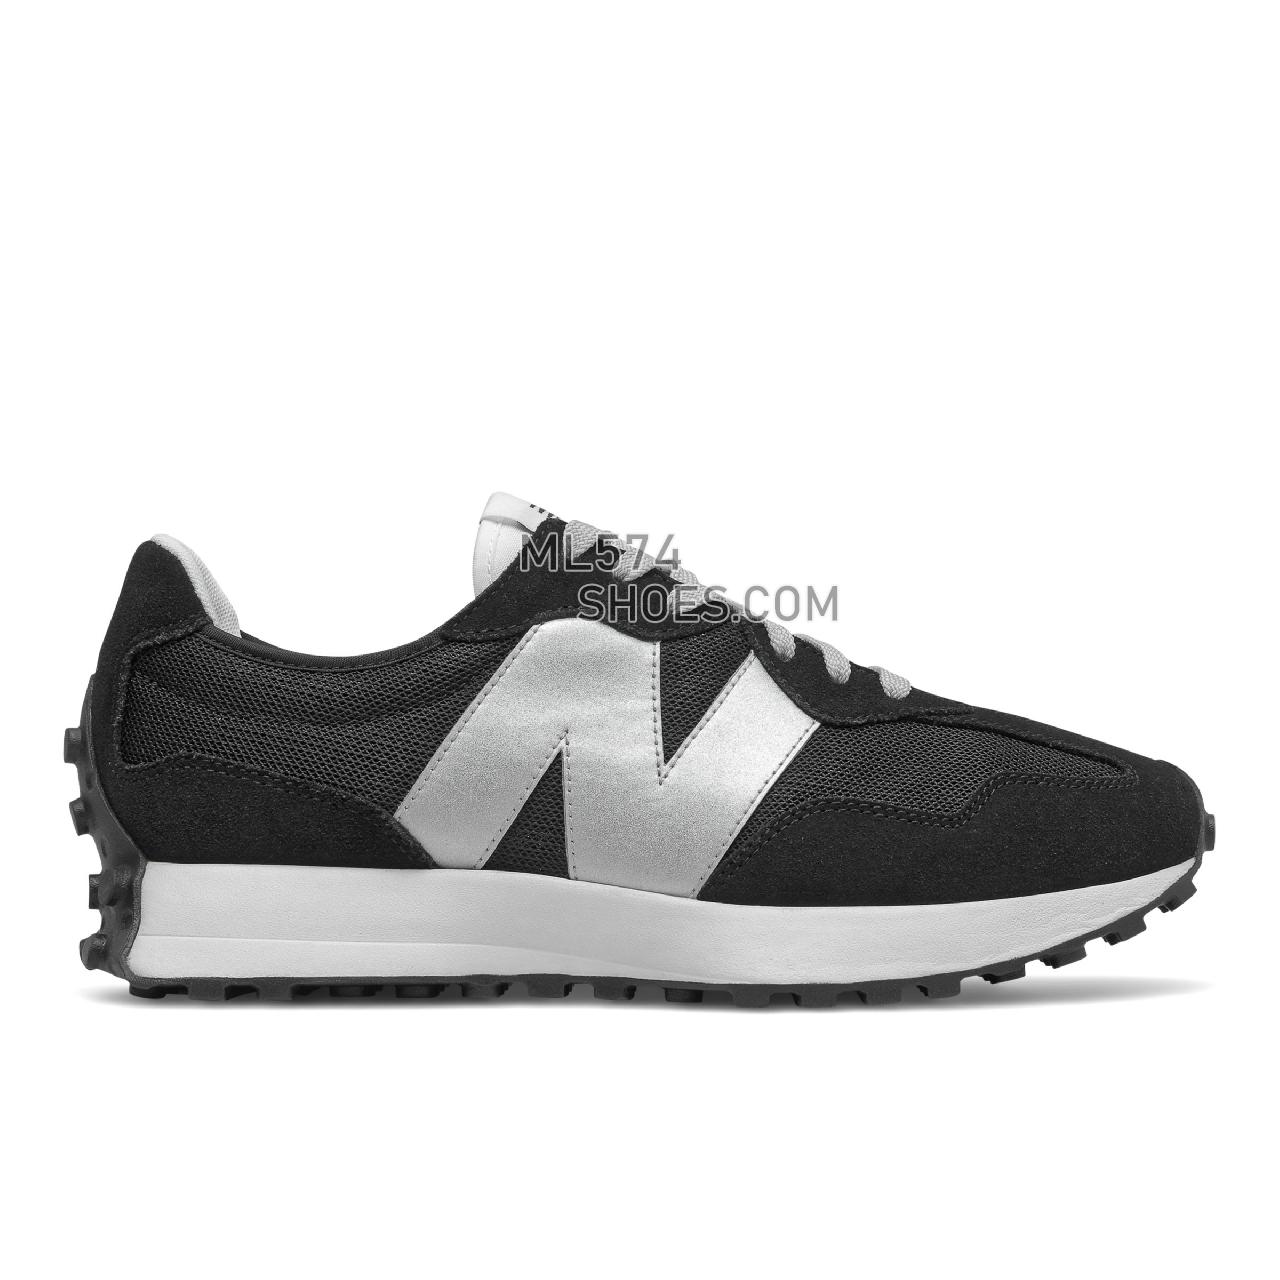 New Balance 327 - Men's Sport Style Sneakers - Black with Metallic Silver - MS327MM1